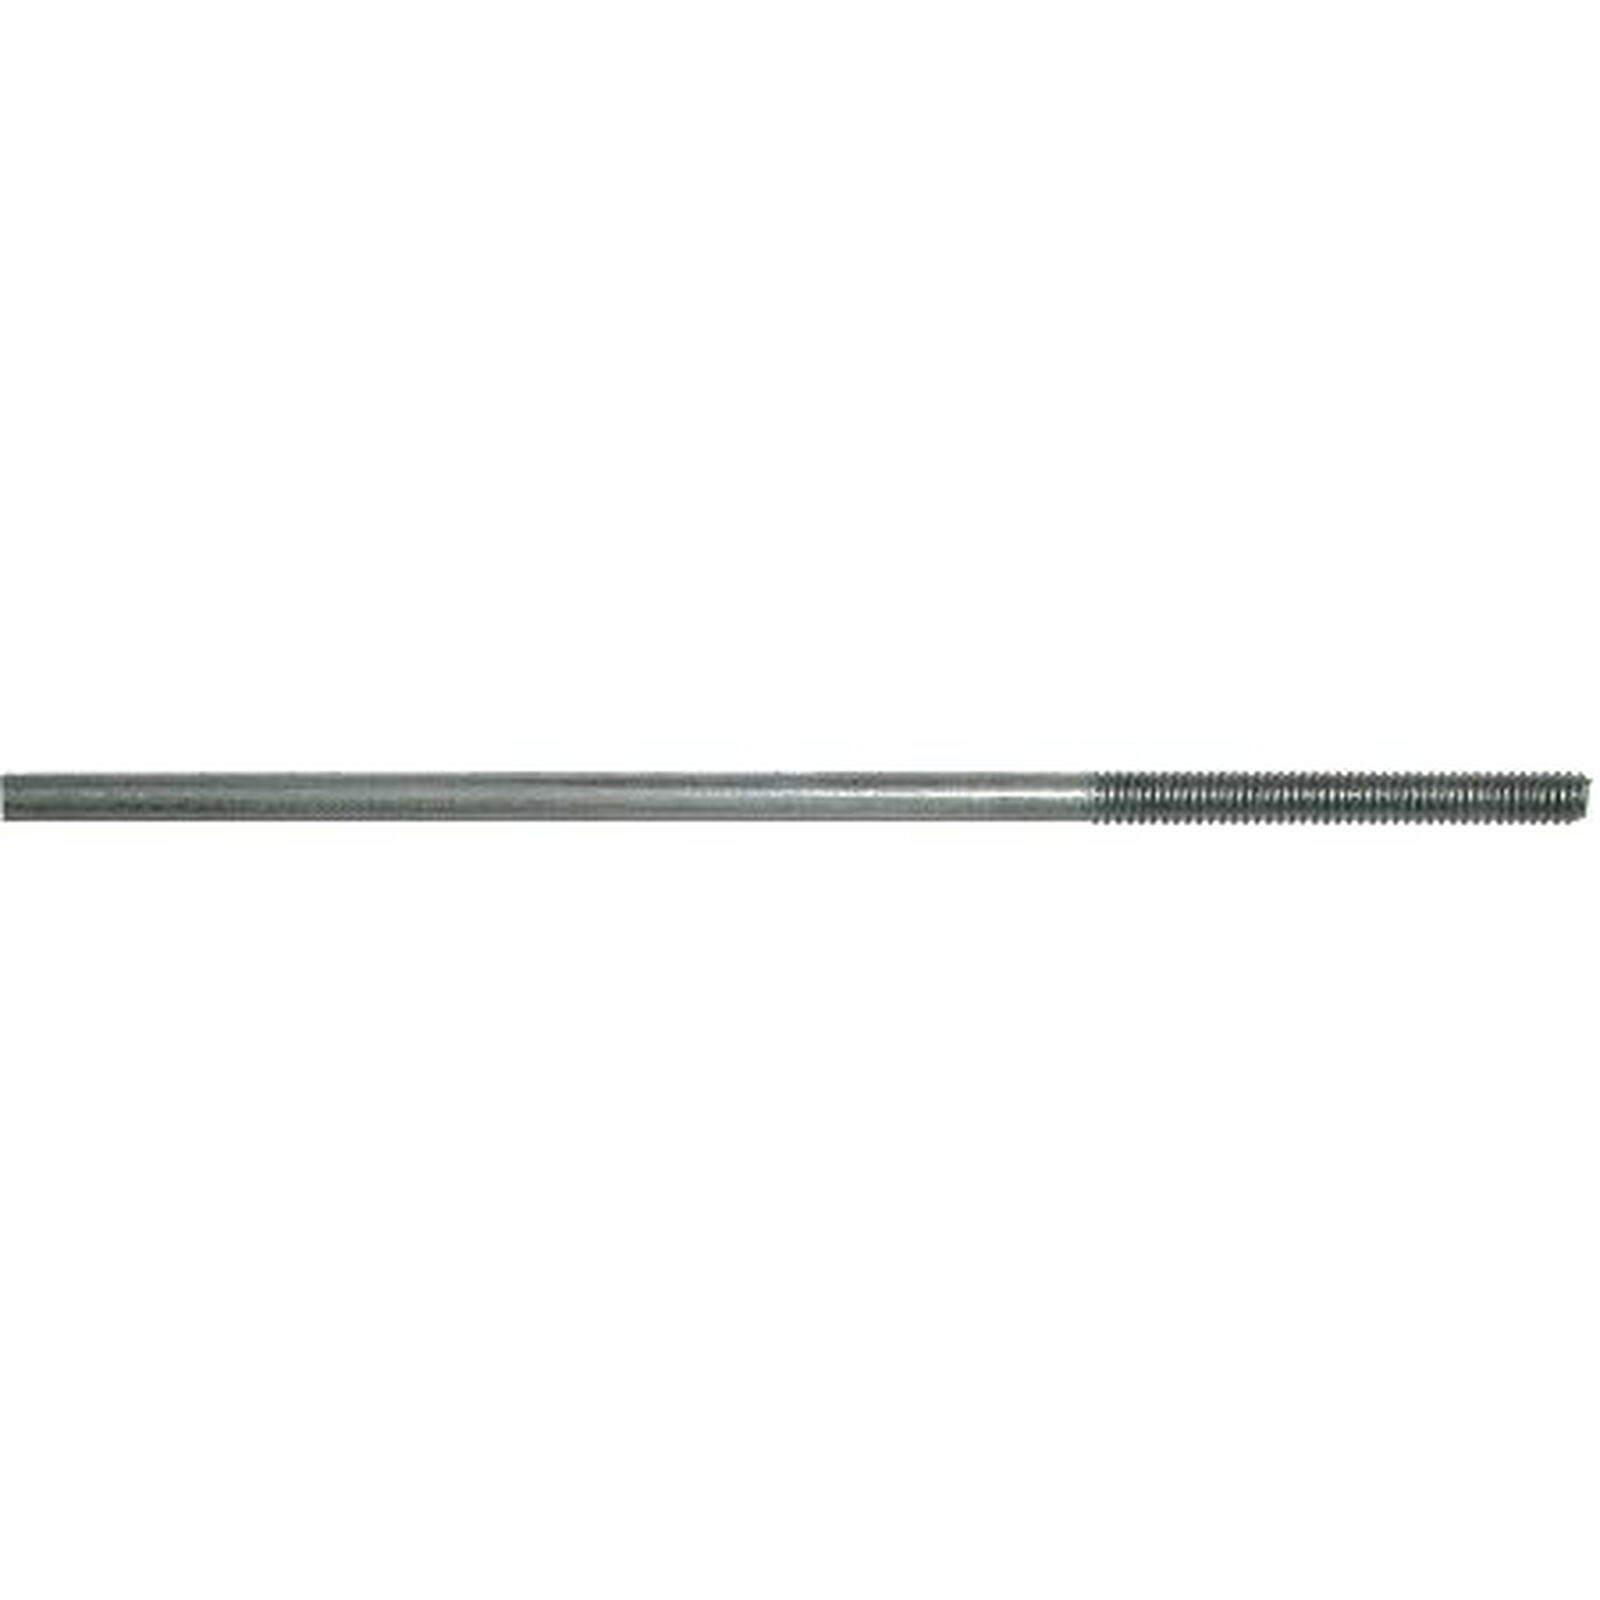 2-56 Threaded Rods Double End (8)